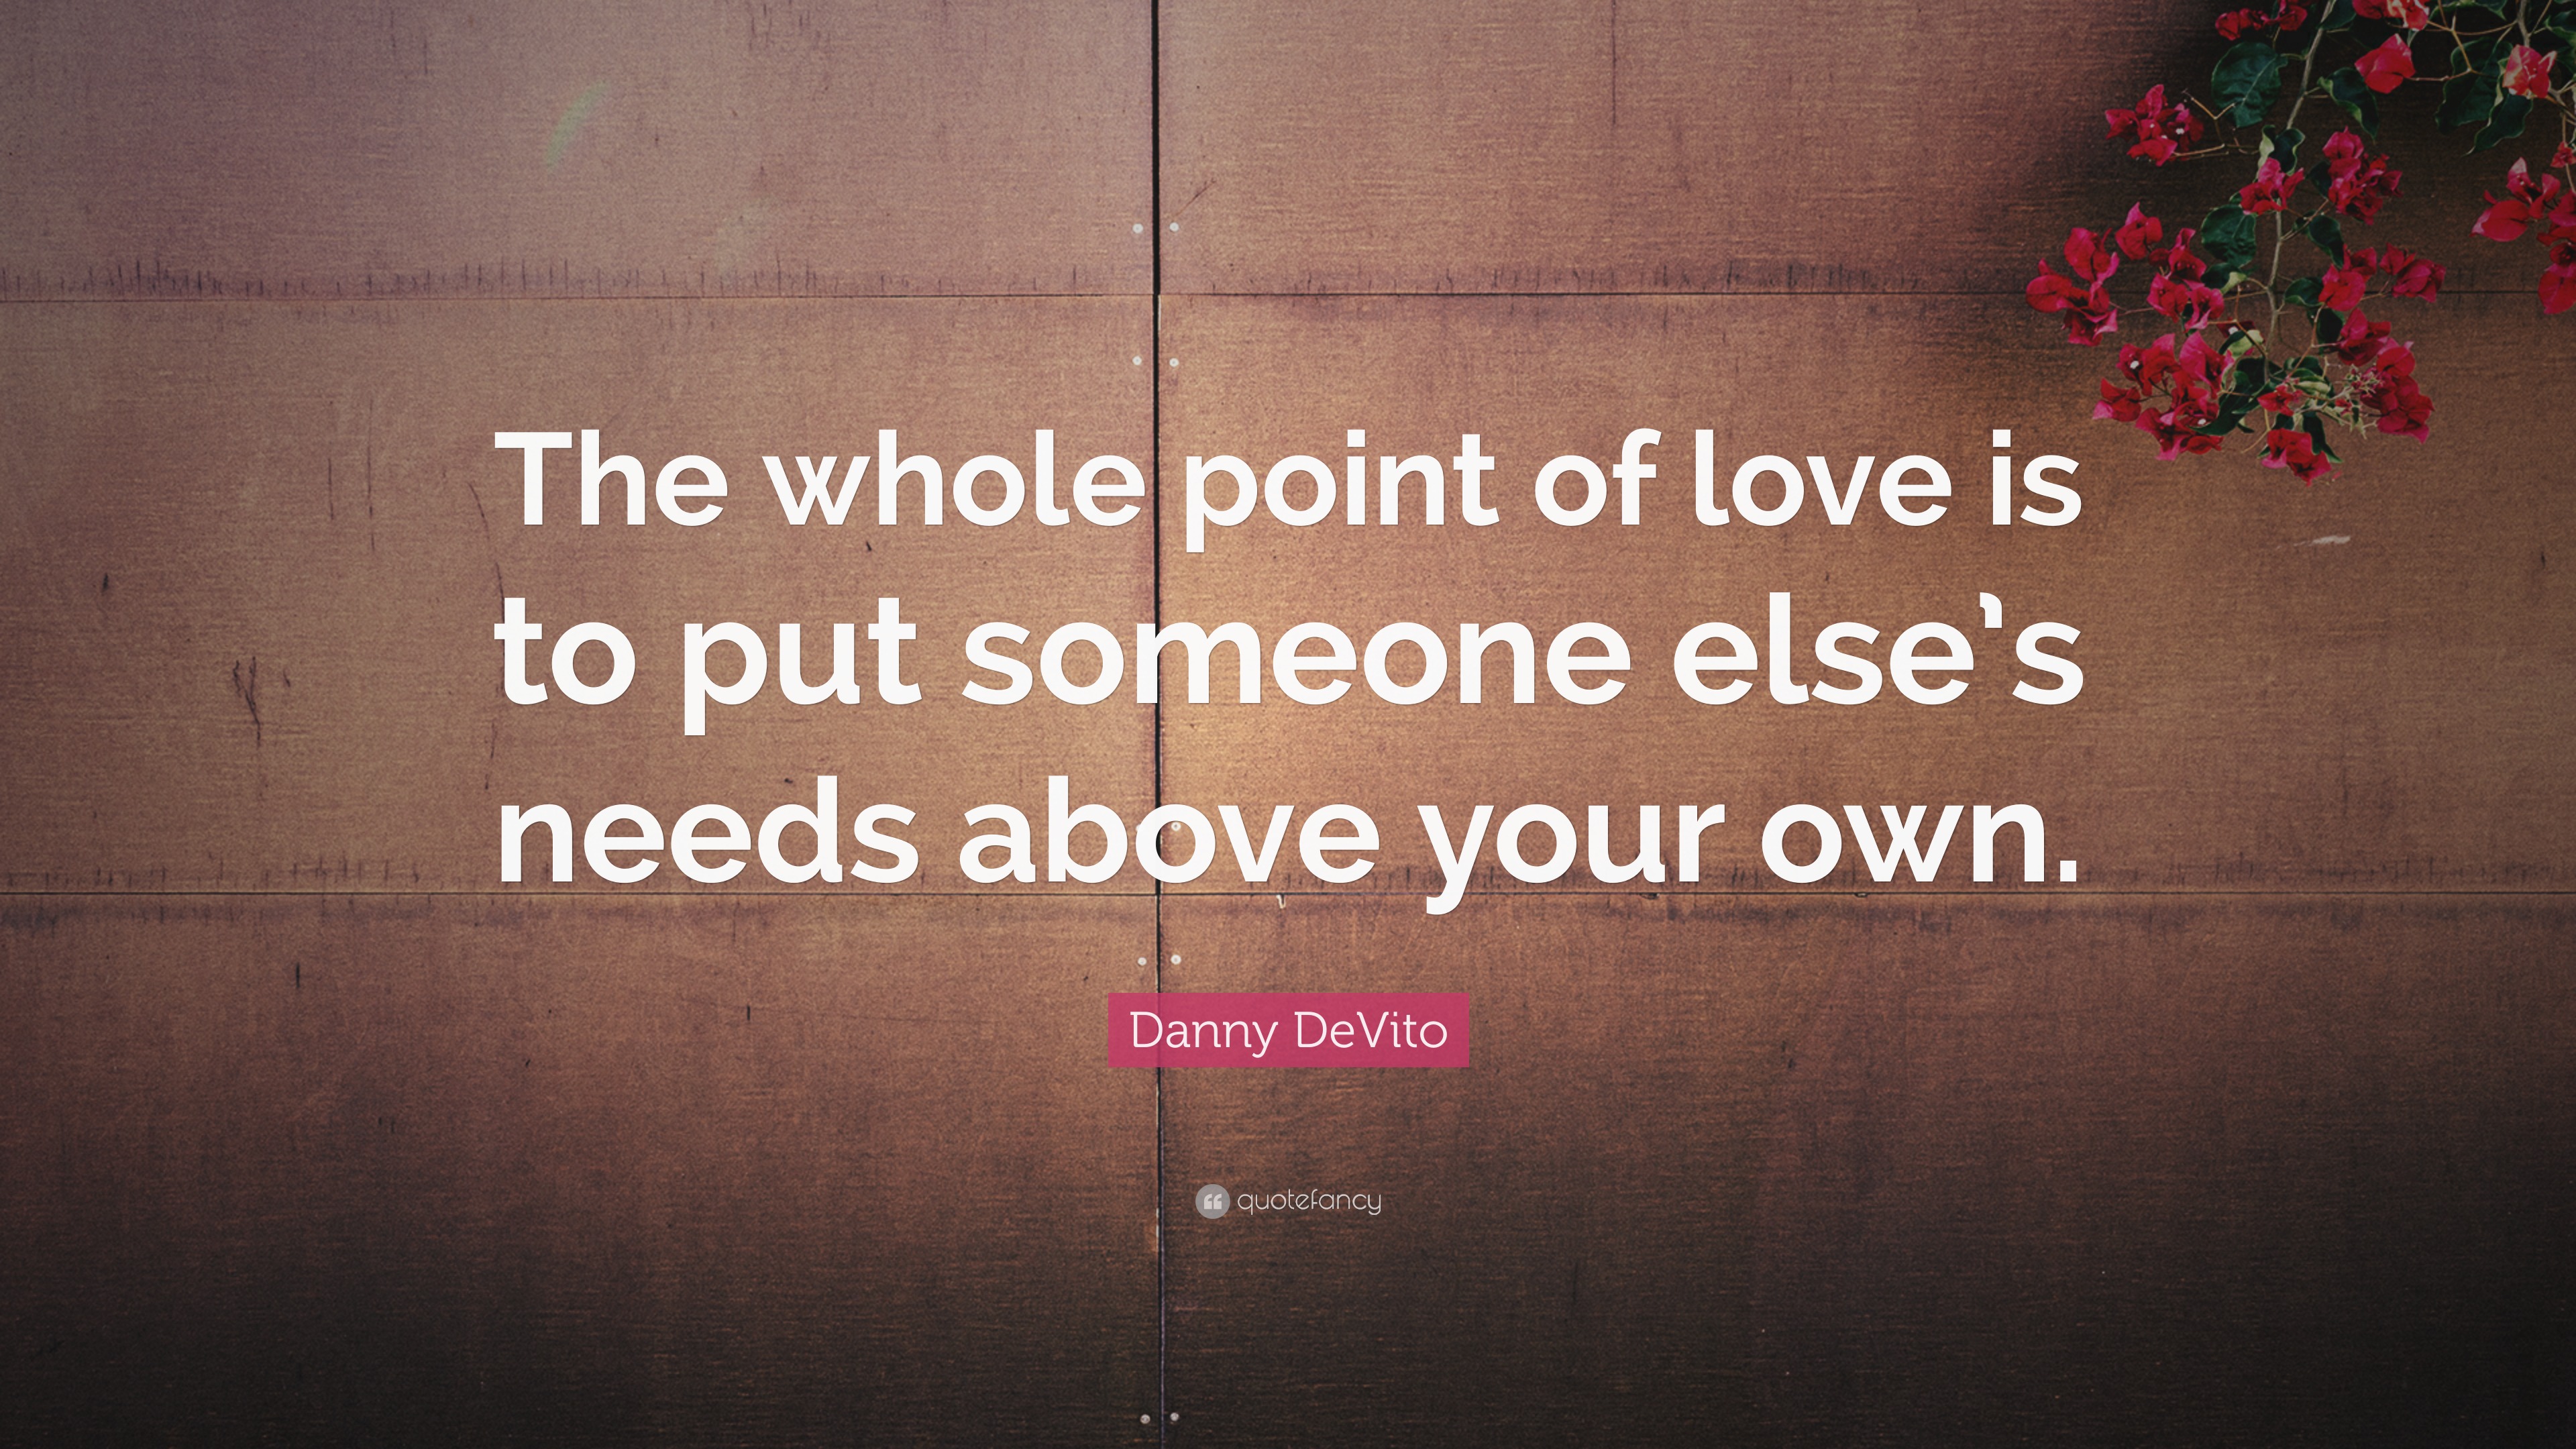 Danny DeVito Quote: “The whole point of love is to put someone else’s ...